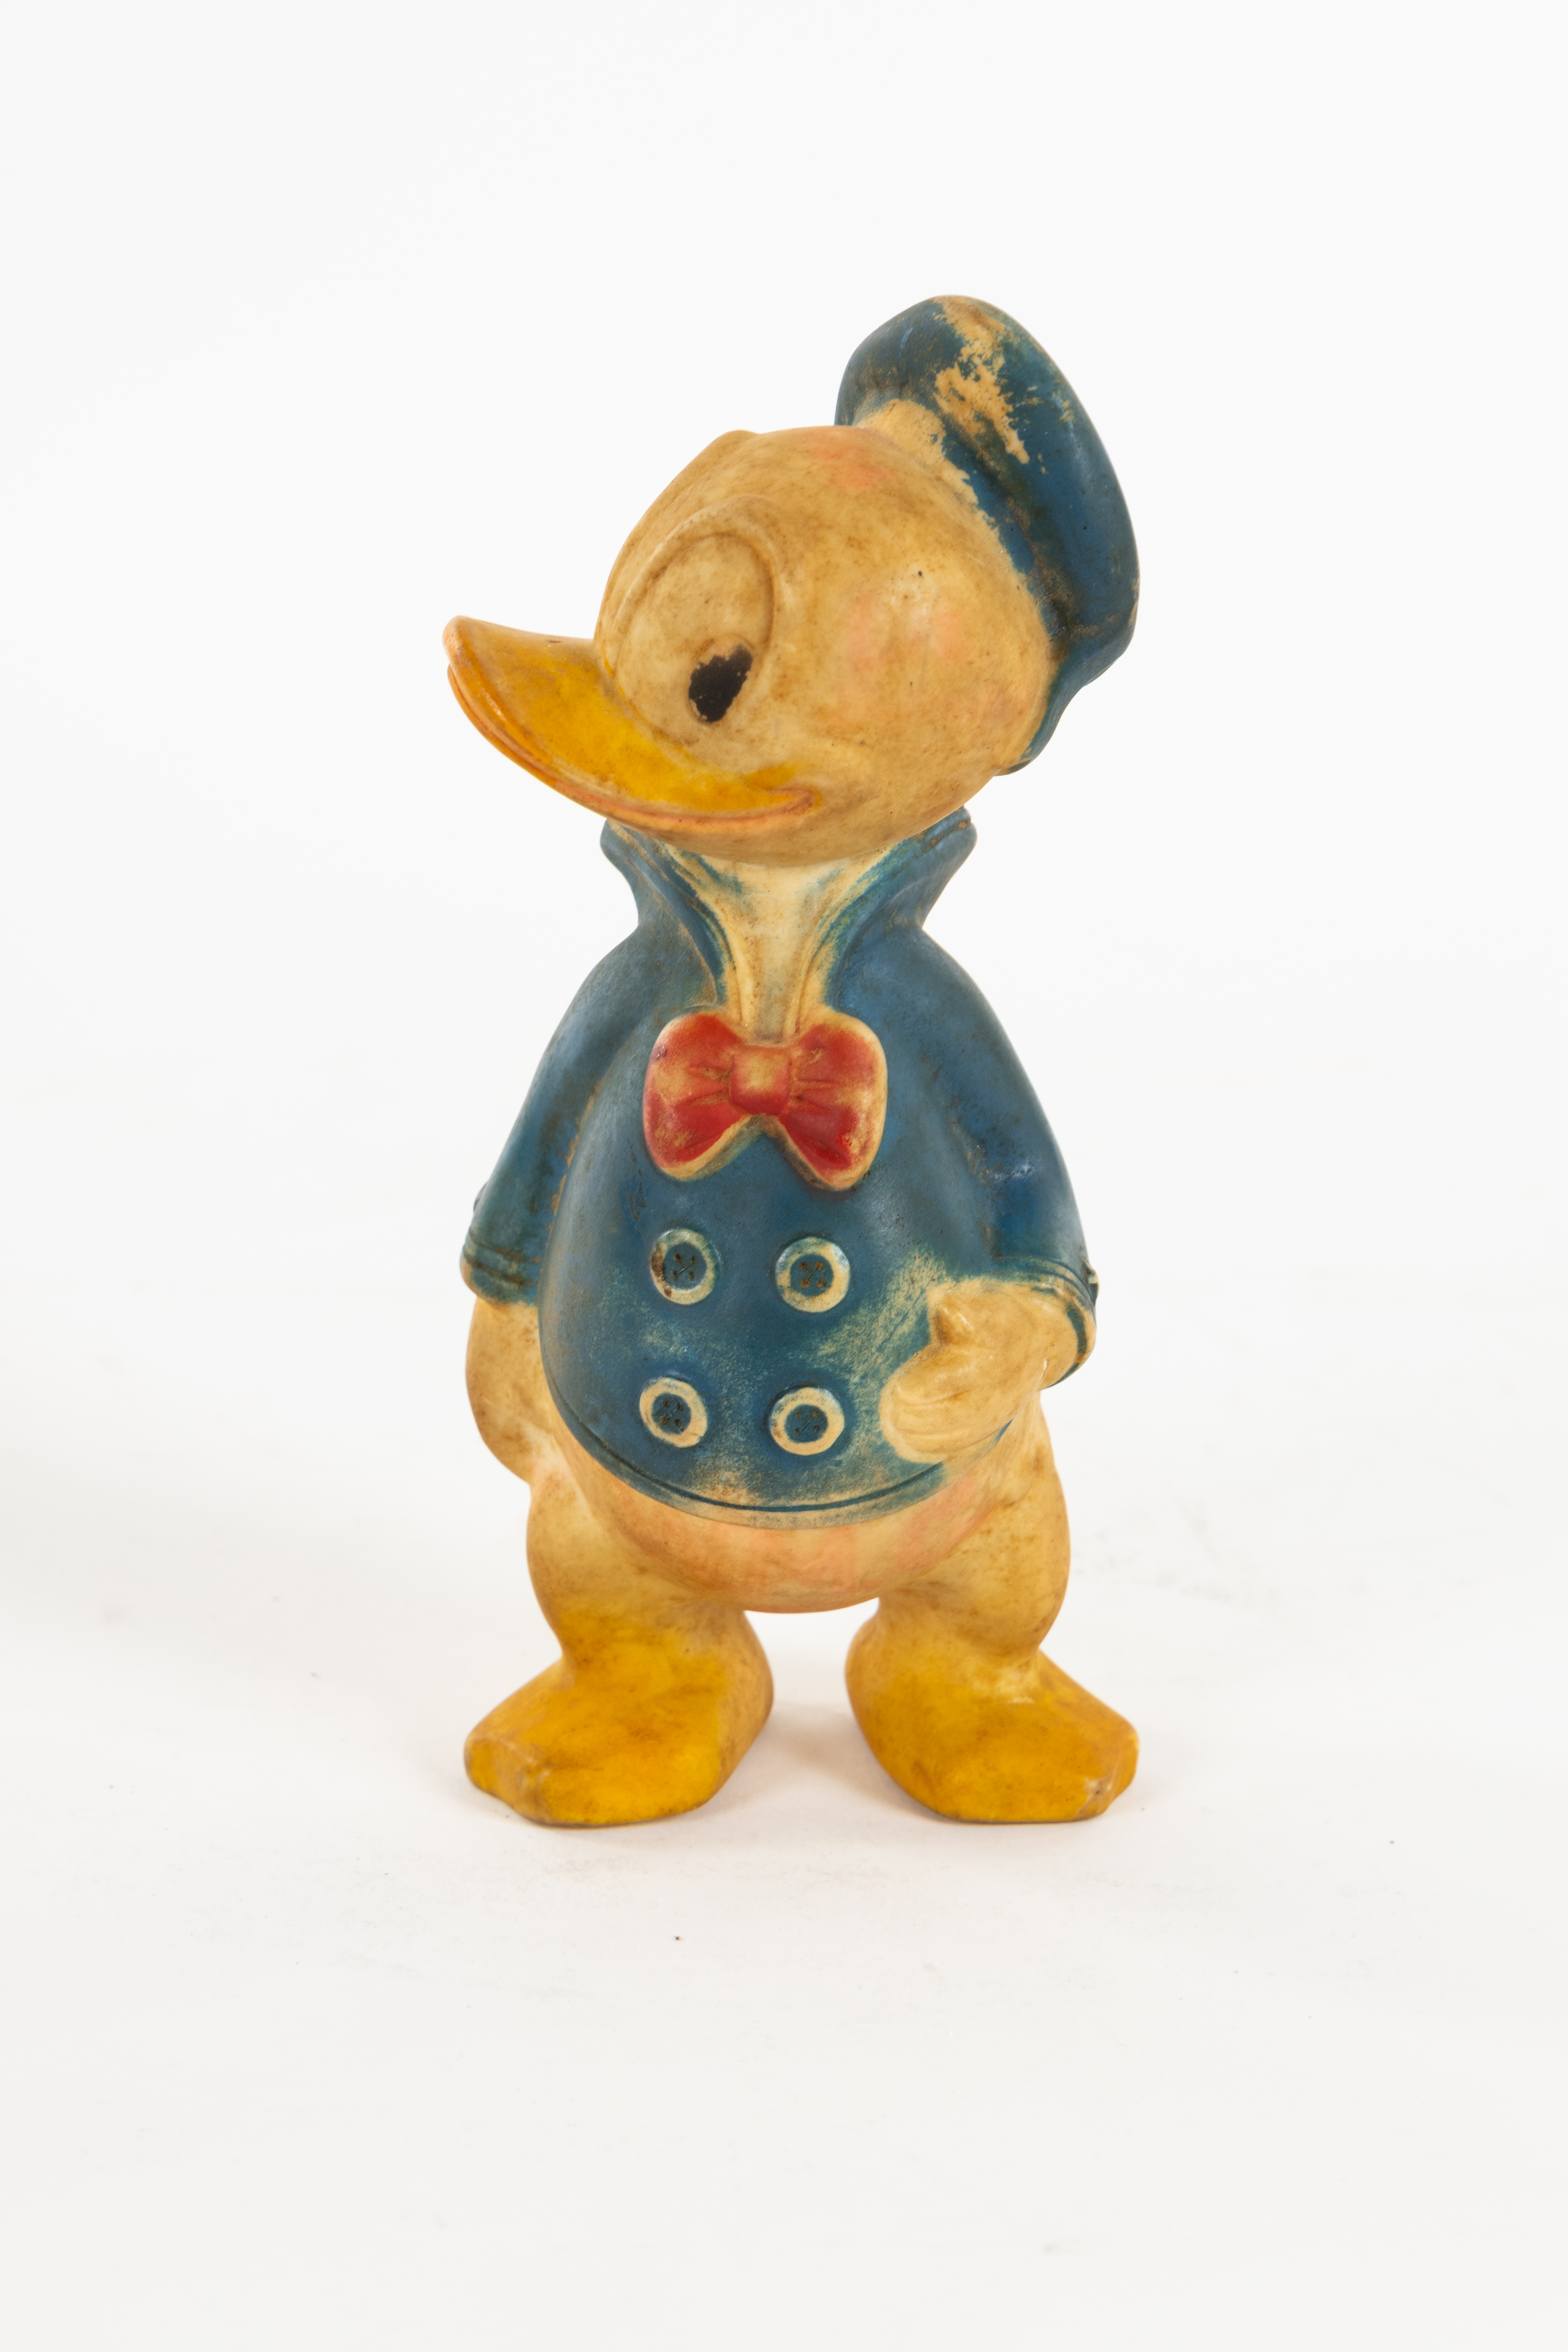 When Anderson worked as a disc jockey at Commerce, Georgia station WJJC in 1957, this rubber duck was his on-air sidekick on his daily radio show. He would squeeze Josh Waddlesforth McDuck—as his popular co-host was named—to make it squeak, then Anderson would interpret for his listeners what it was saying. 